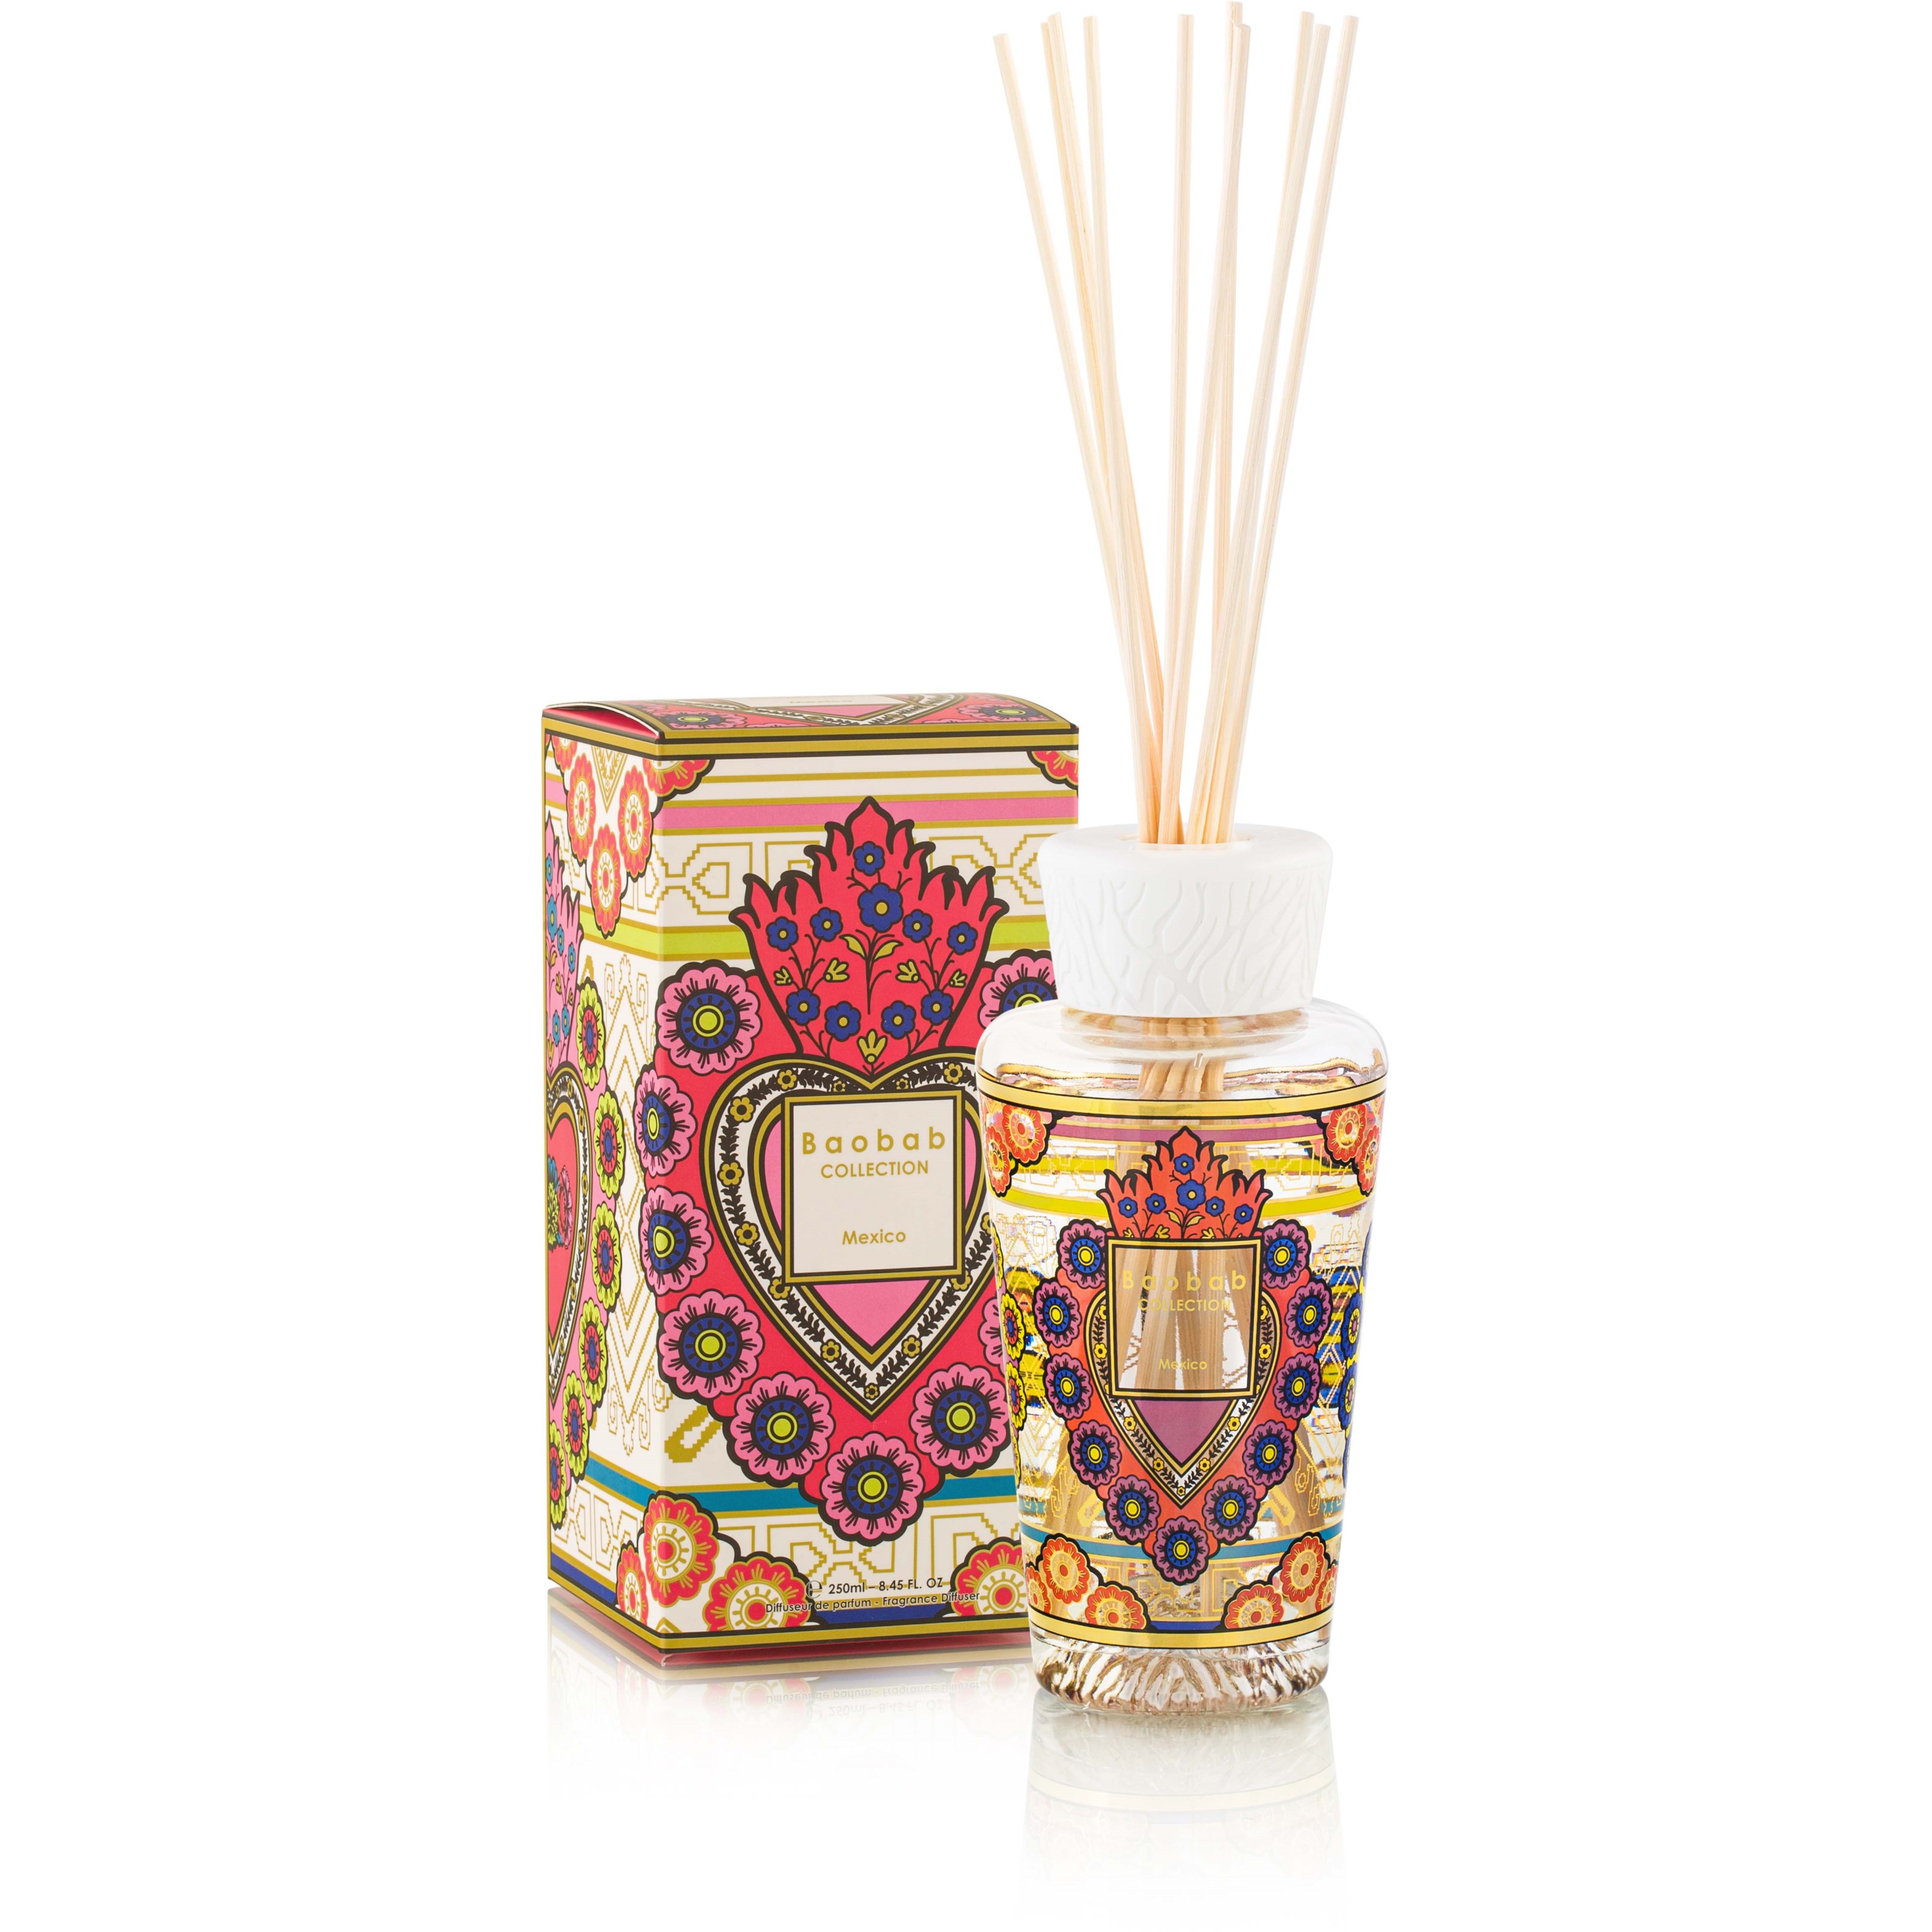 Baobab Collection Mexico My First Baobab Diffuser 250 ml